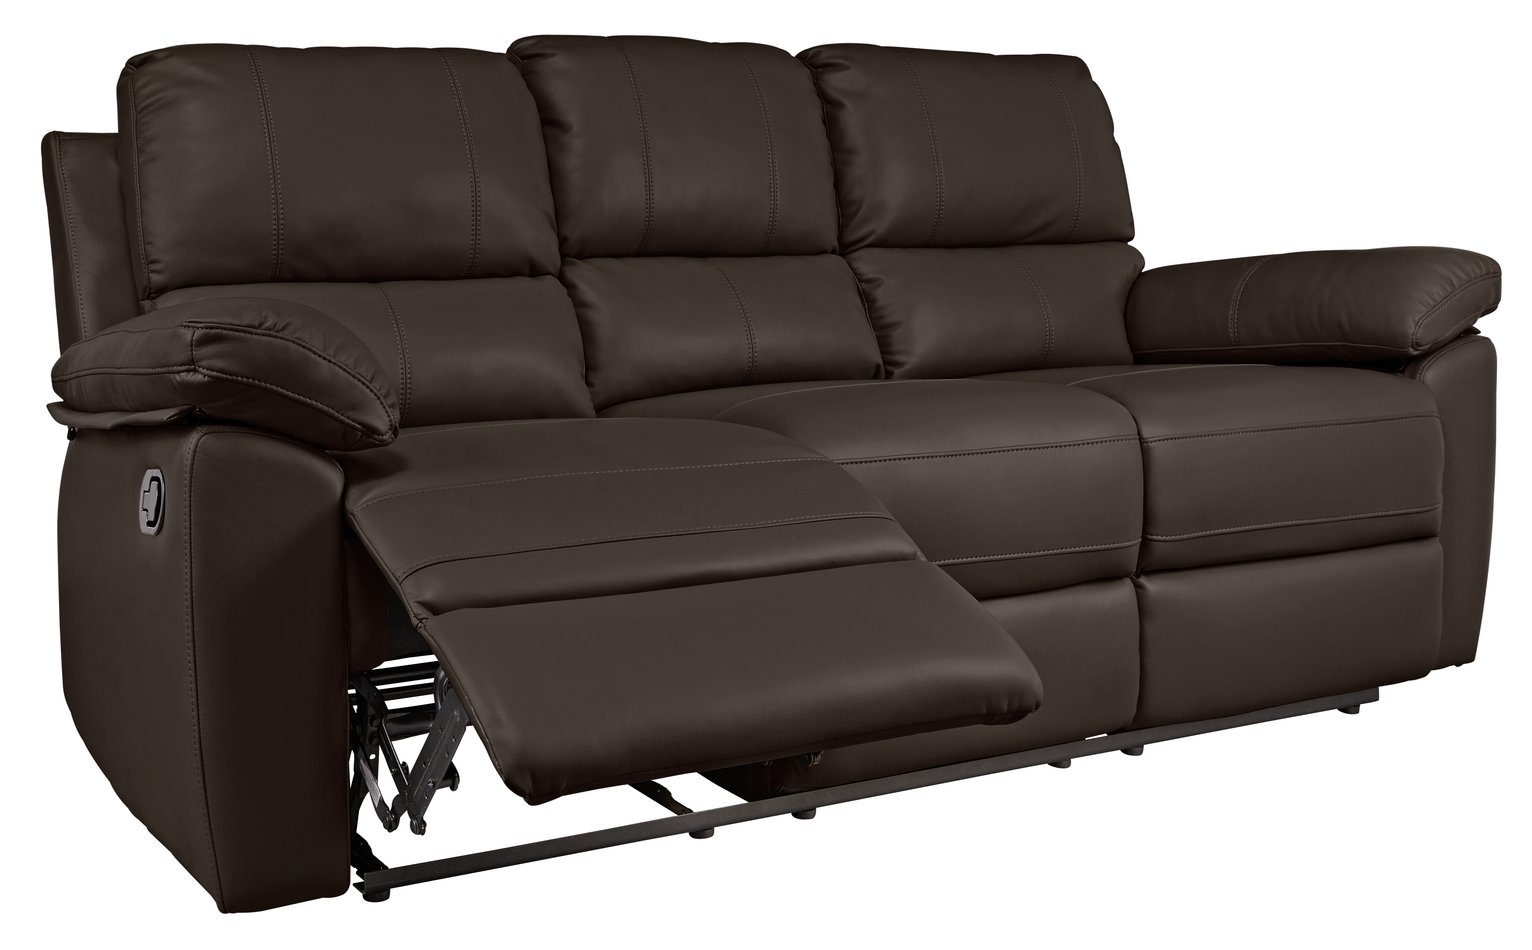 Argos Home Toby Faux Leather 3 Seater Recliner Sofa - Brown